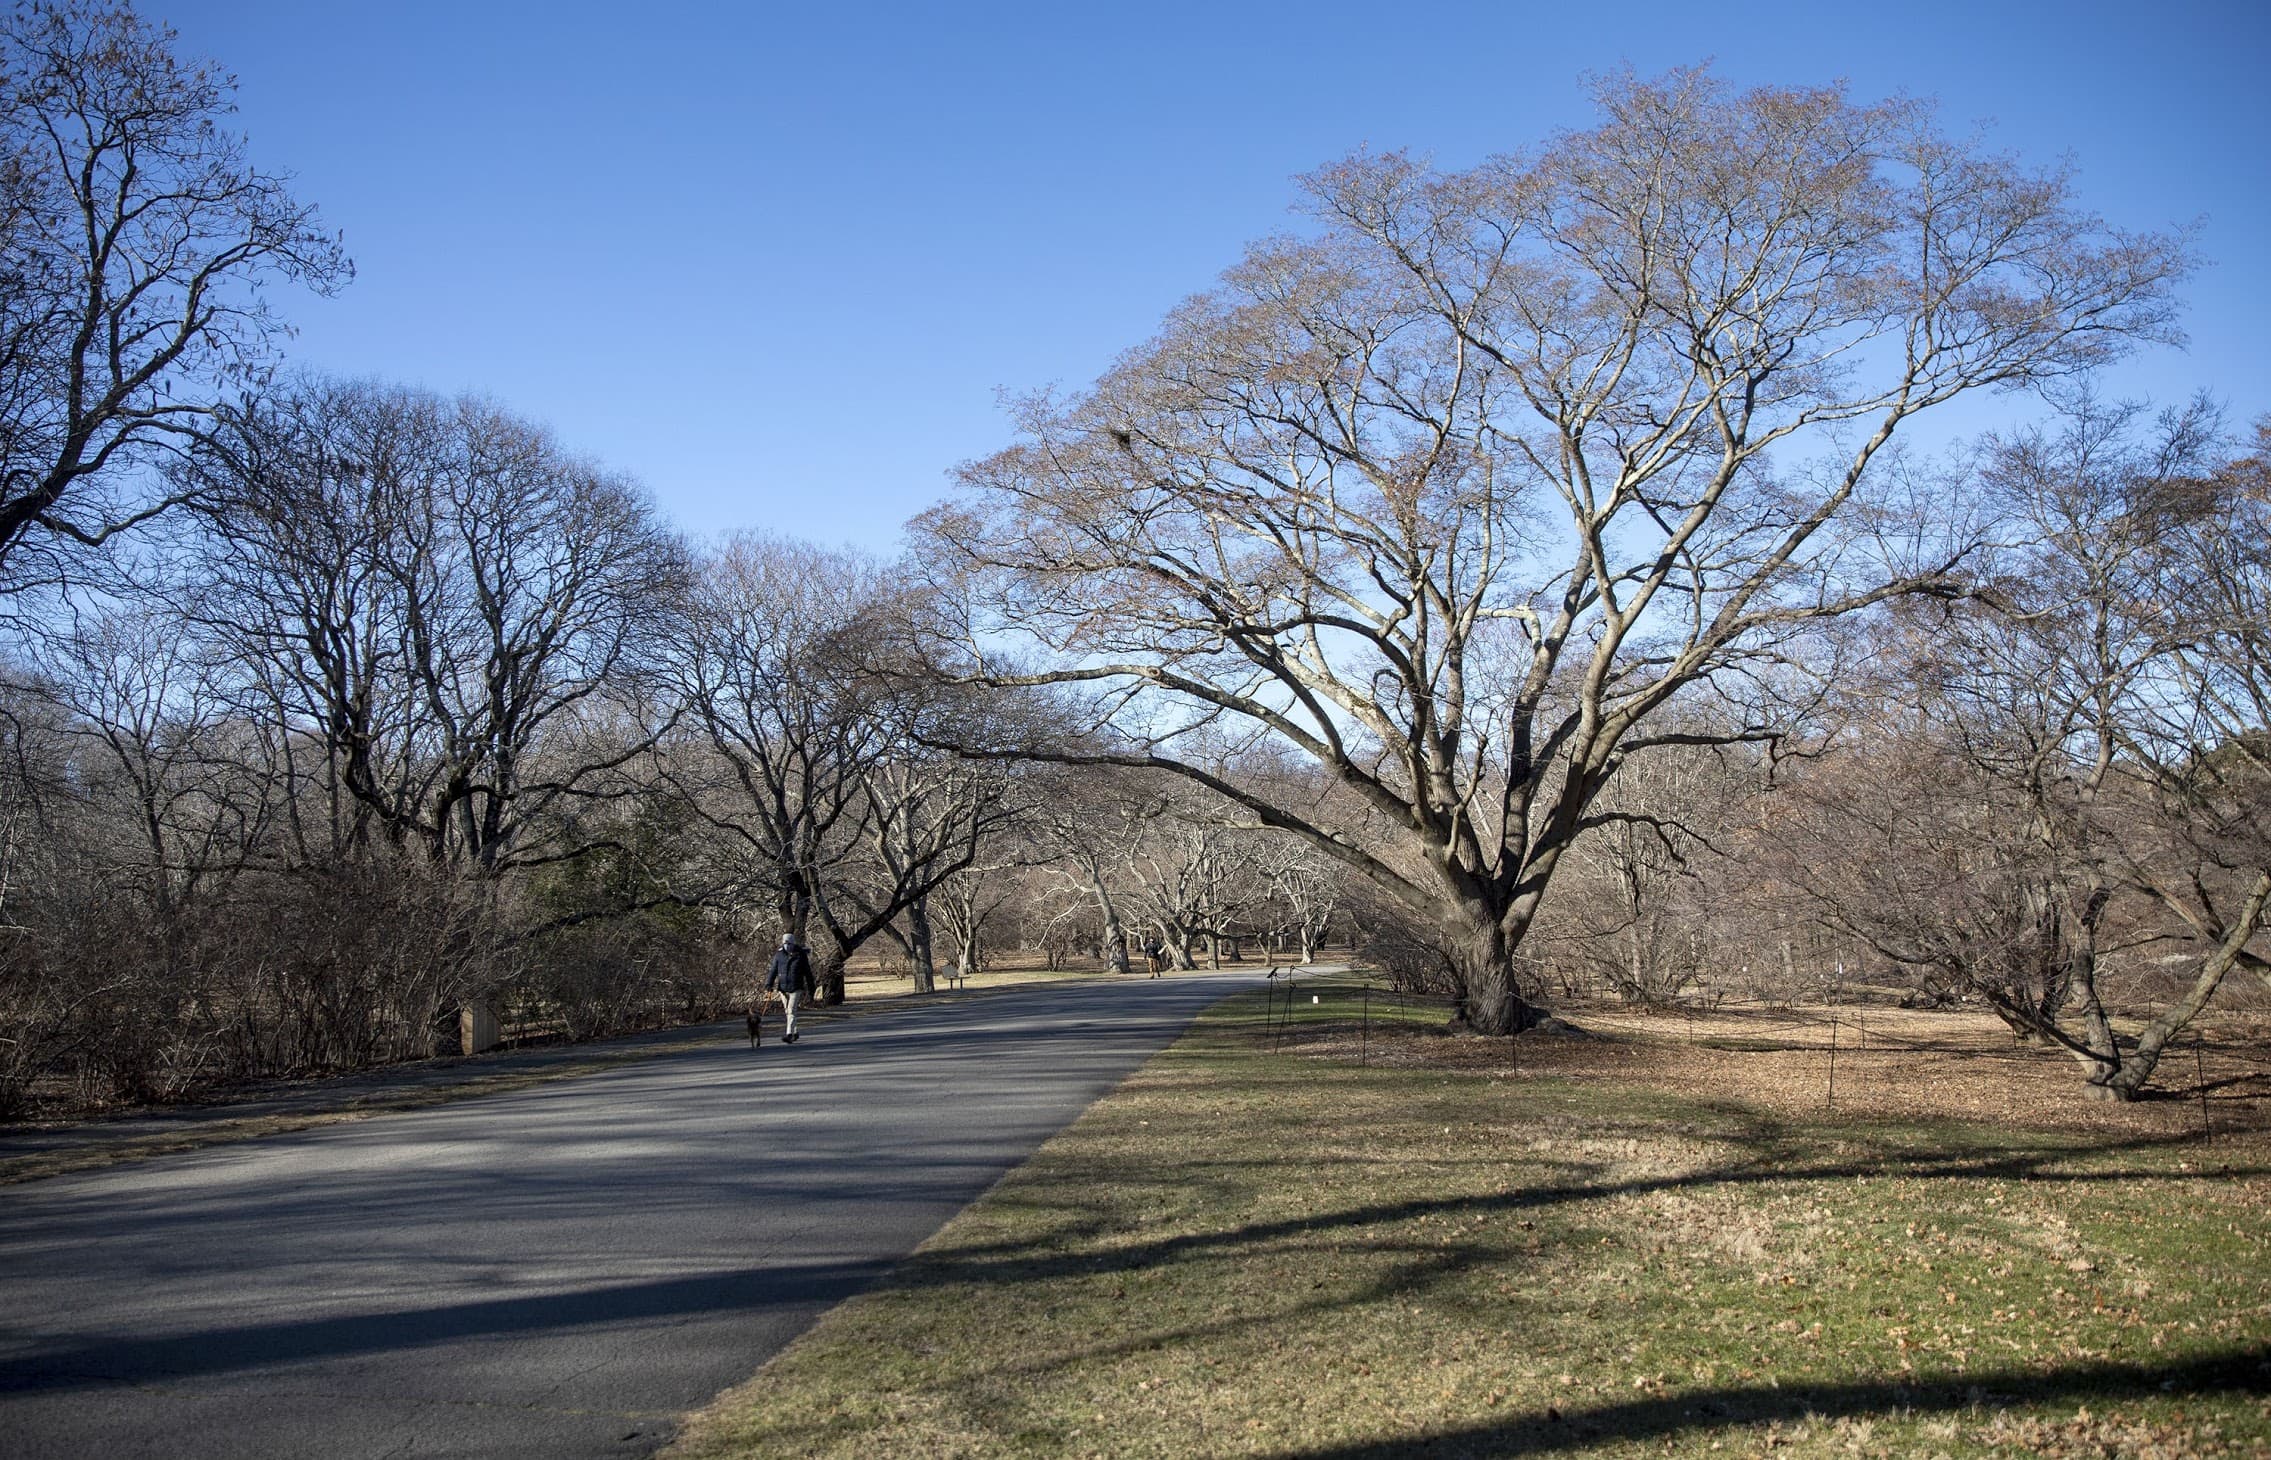 A painted maple at the Arnold Arboretum. Staff check the tree for Asian longhorn beetle each year. (Robin Lubbock/WBUR)